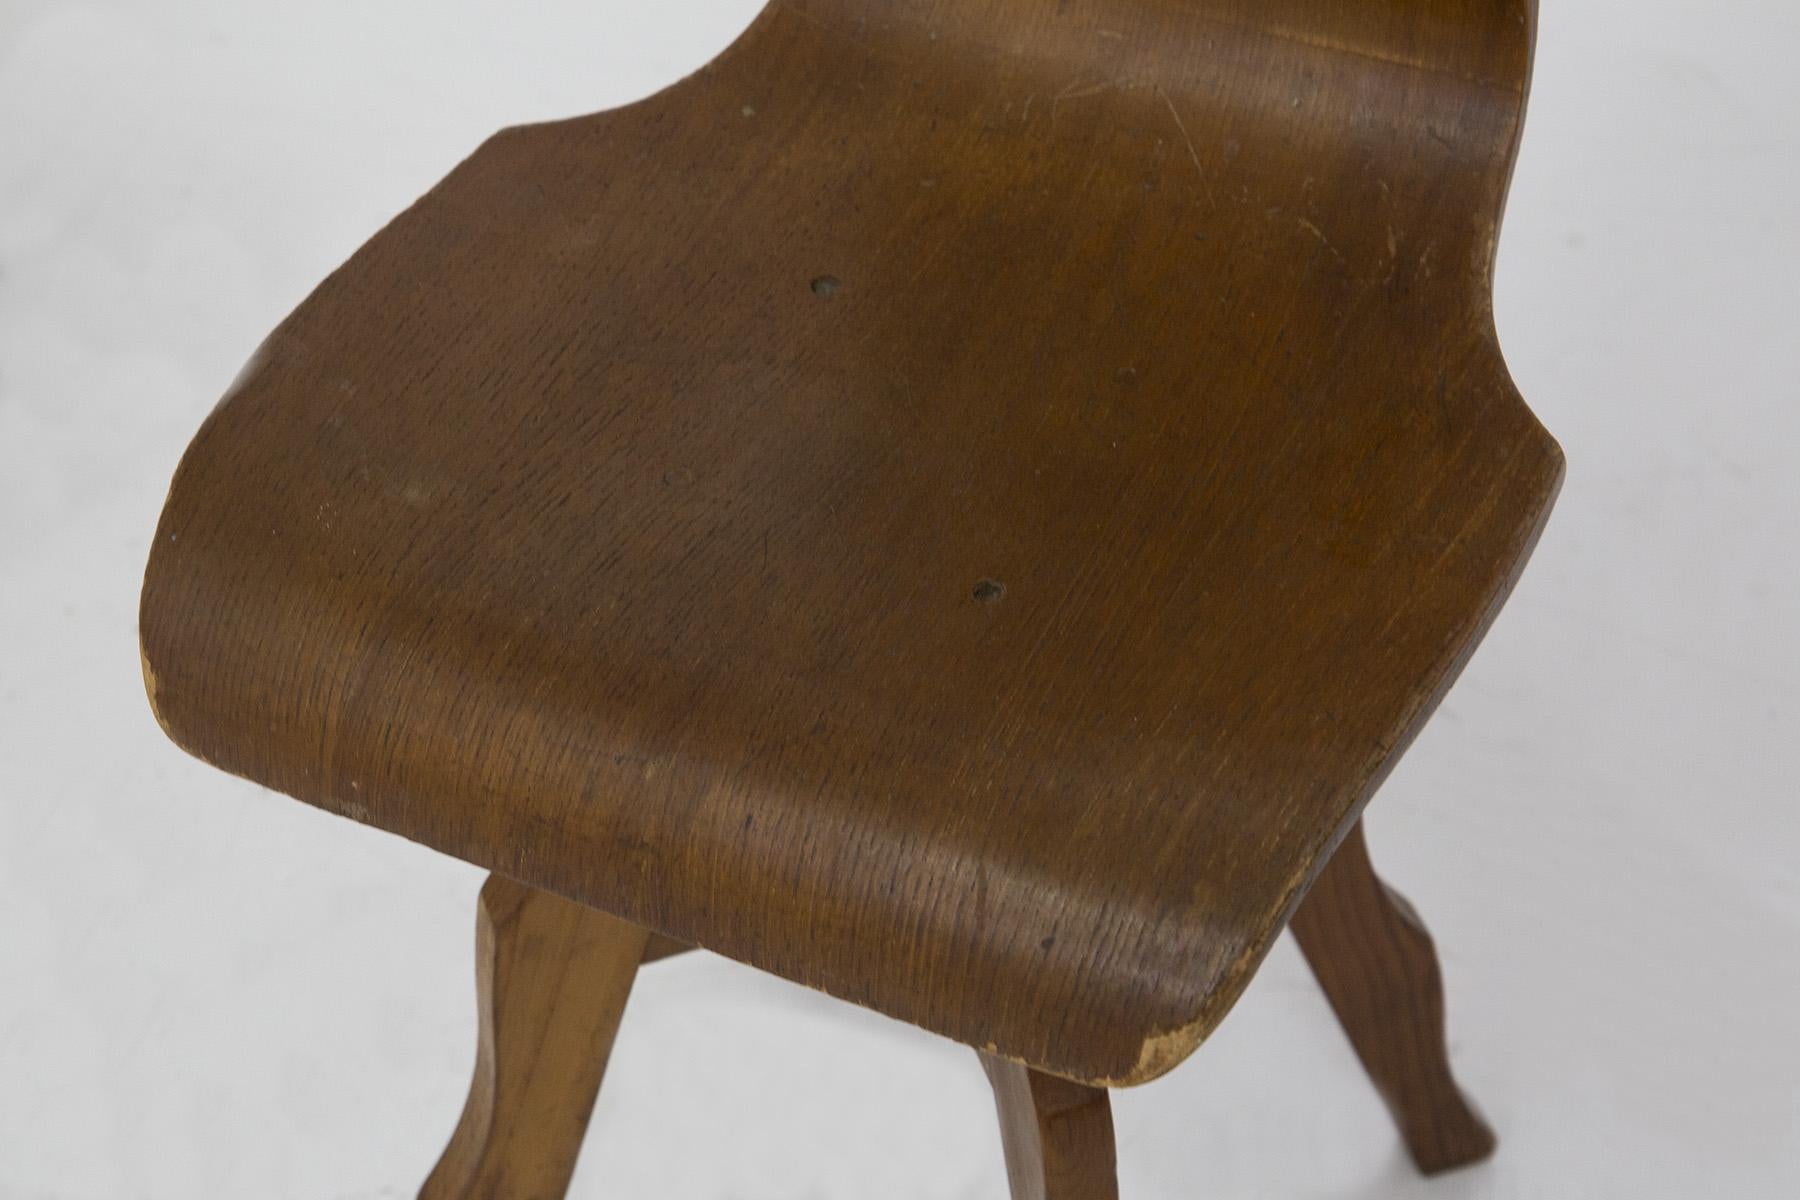 Scuola Torinese Rare Sinuous Chairs in Wood 1